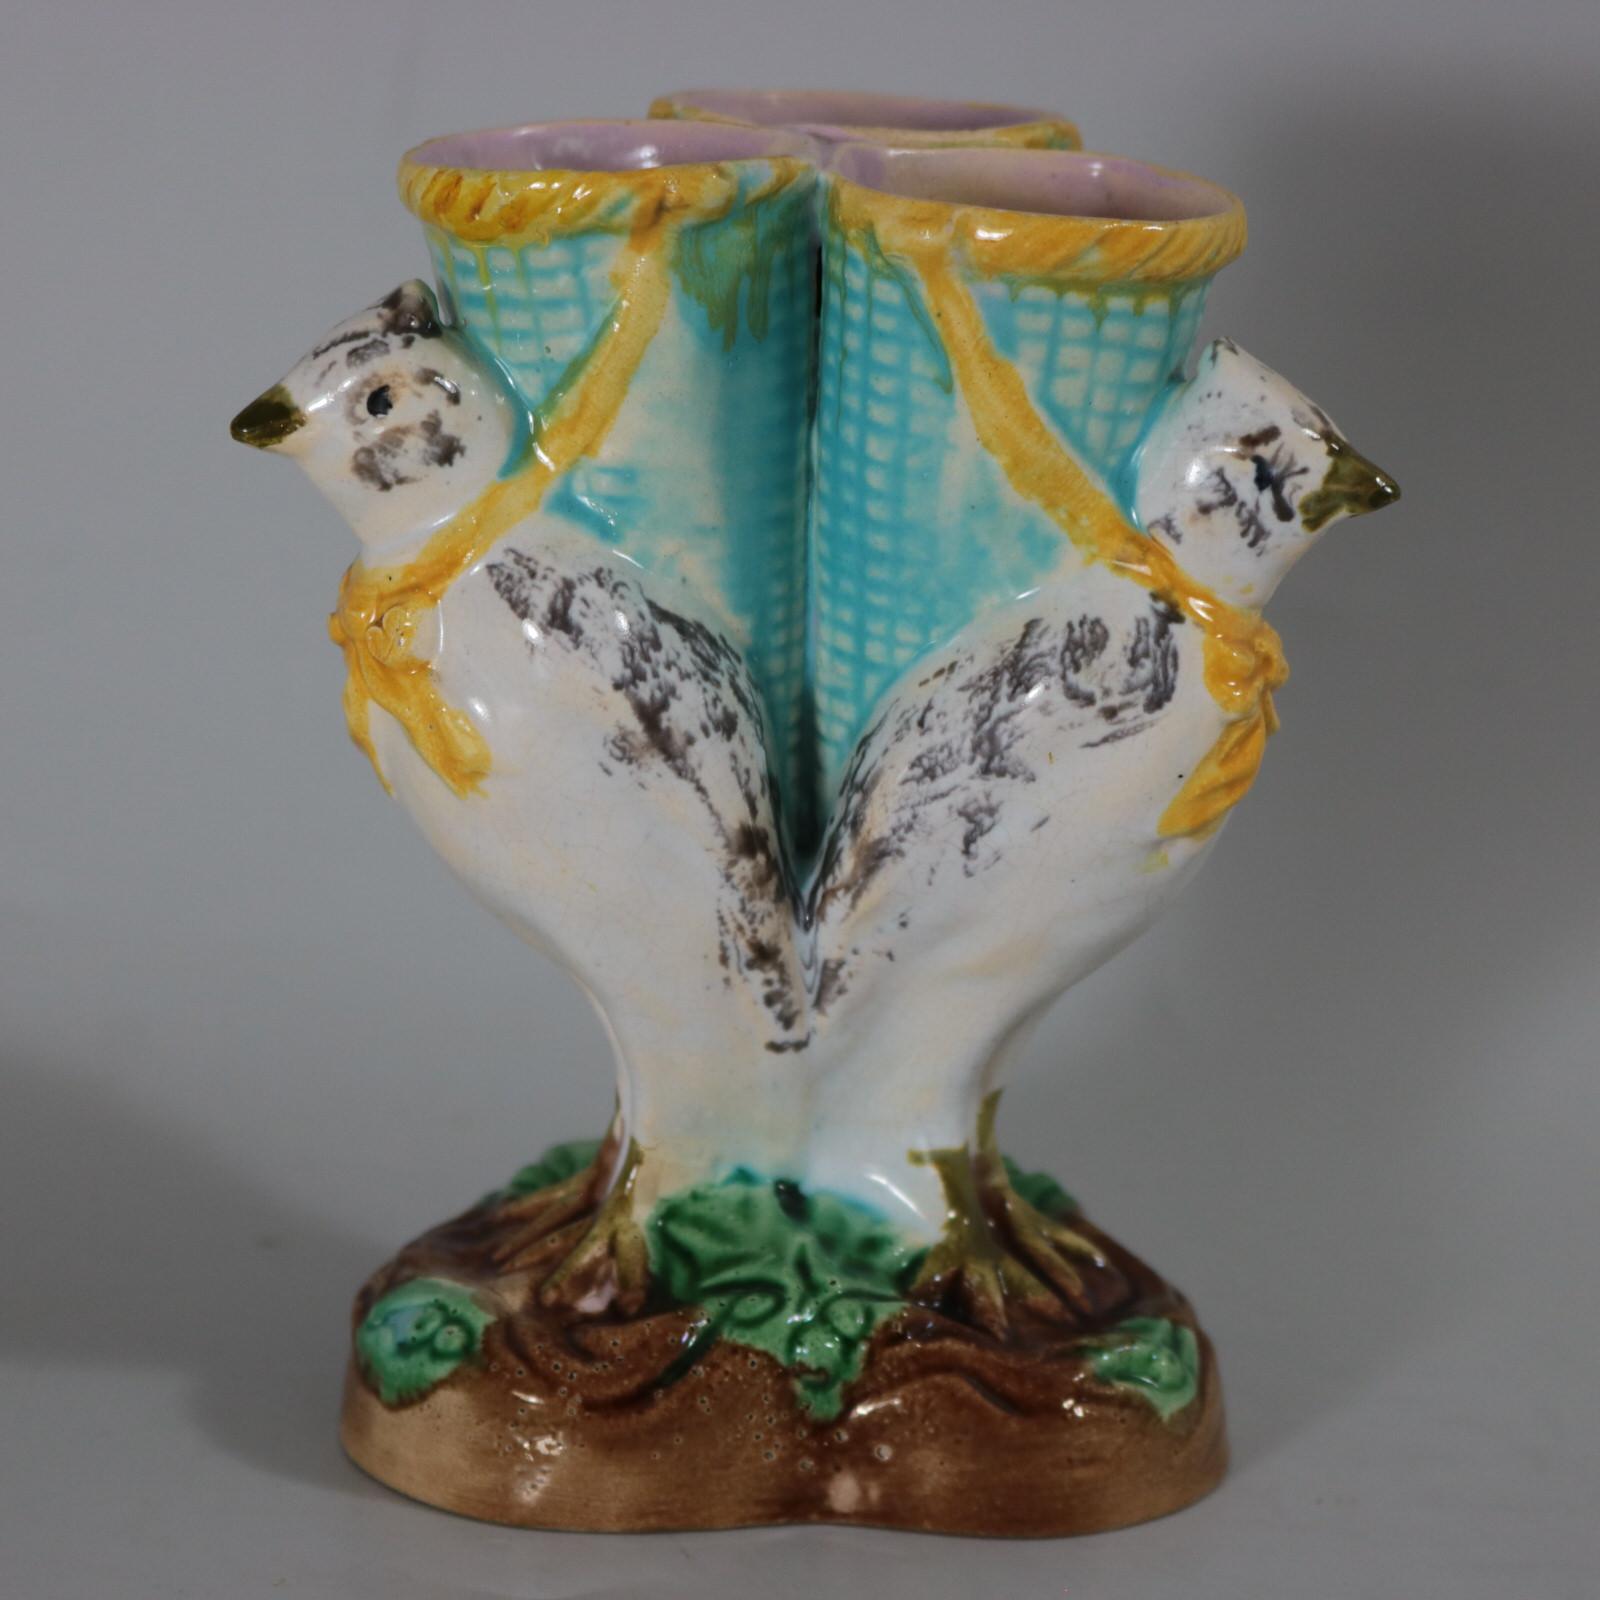 Unidentified English Majolica posy holder which features three birds, supporting baskets on their backs. Colouration: turquoise, white, green, are predominant. The piece bears maker's marks for the Unidentified English pottery. Bears a pattern